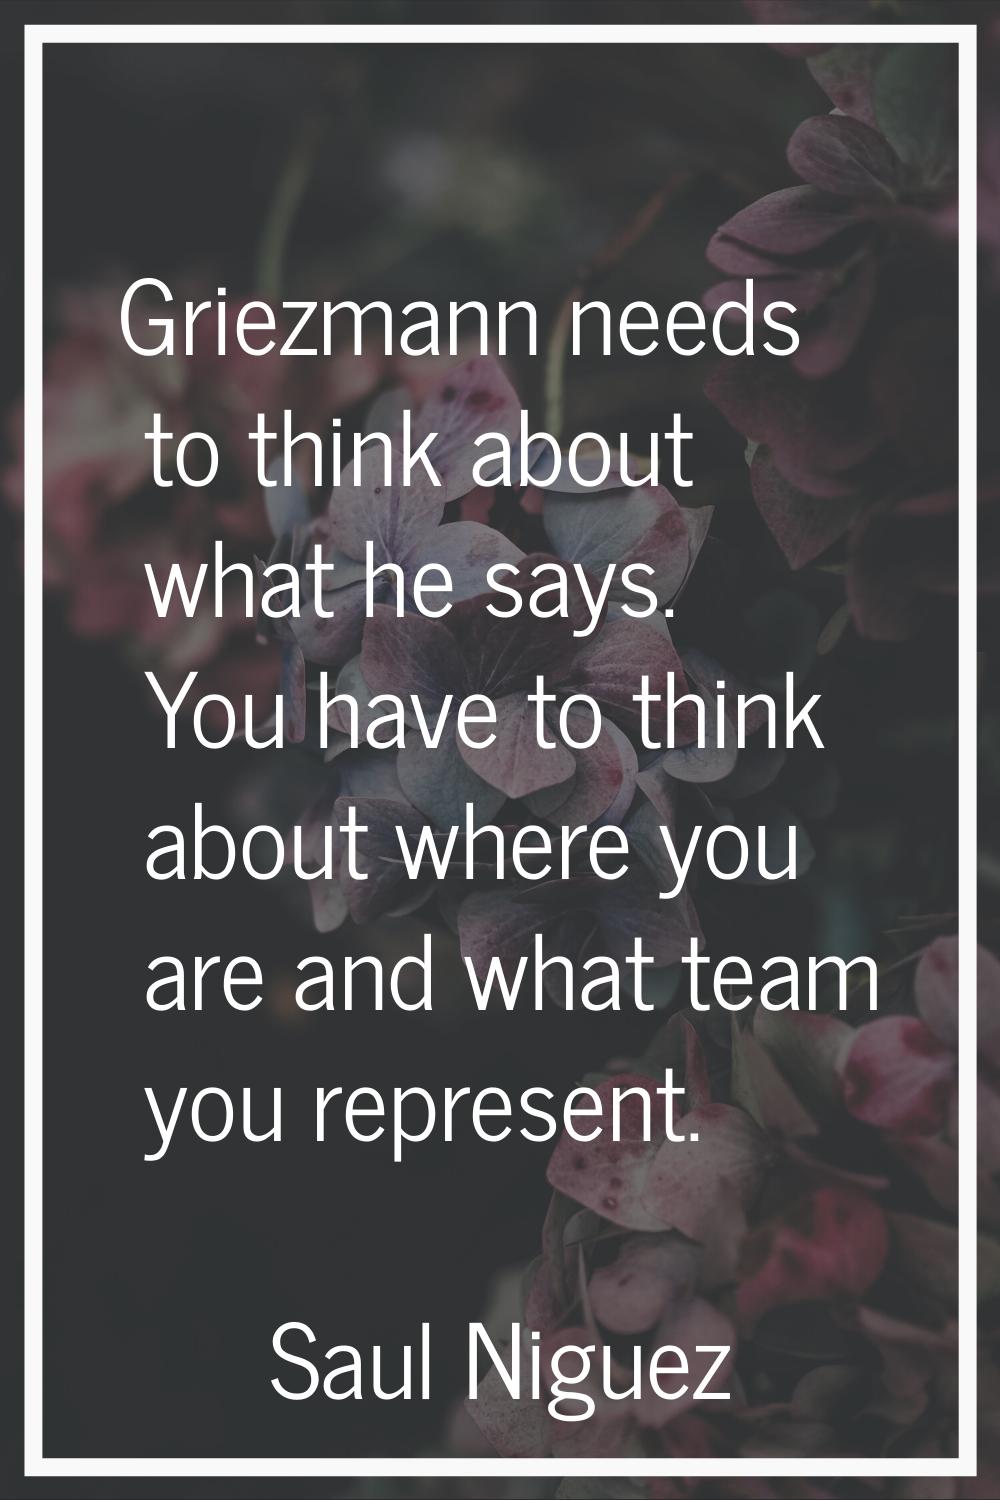 Griezmann needs to think about what he says. You have to think about where you are and what team yo